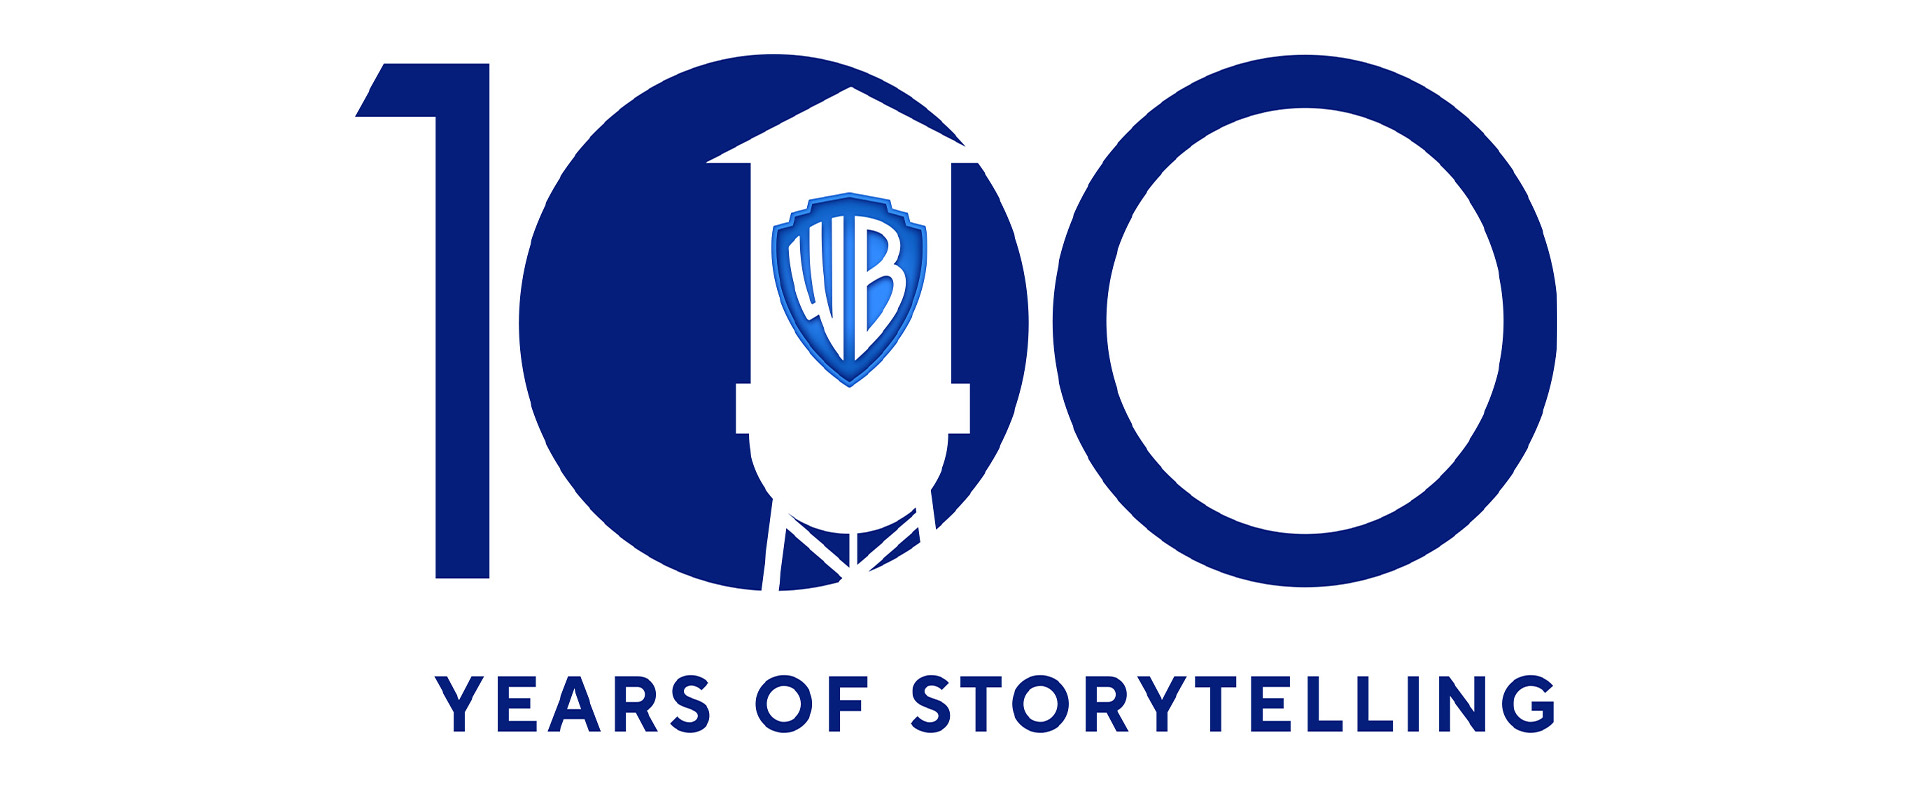 Warner Bros. Unveils Centennial Logo in Advance of the Iconic Studio's  100th Anniversary